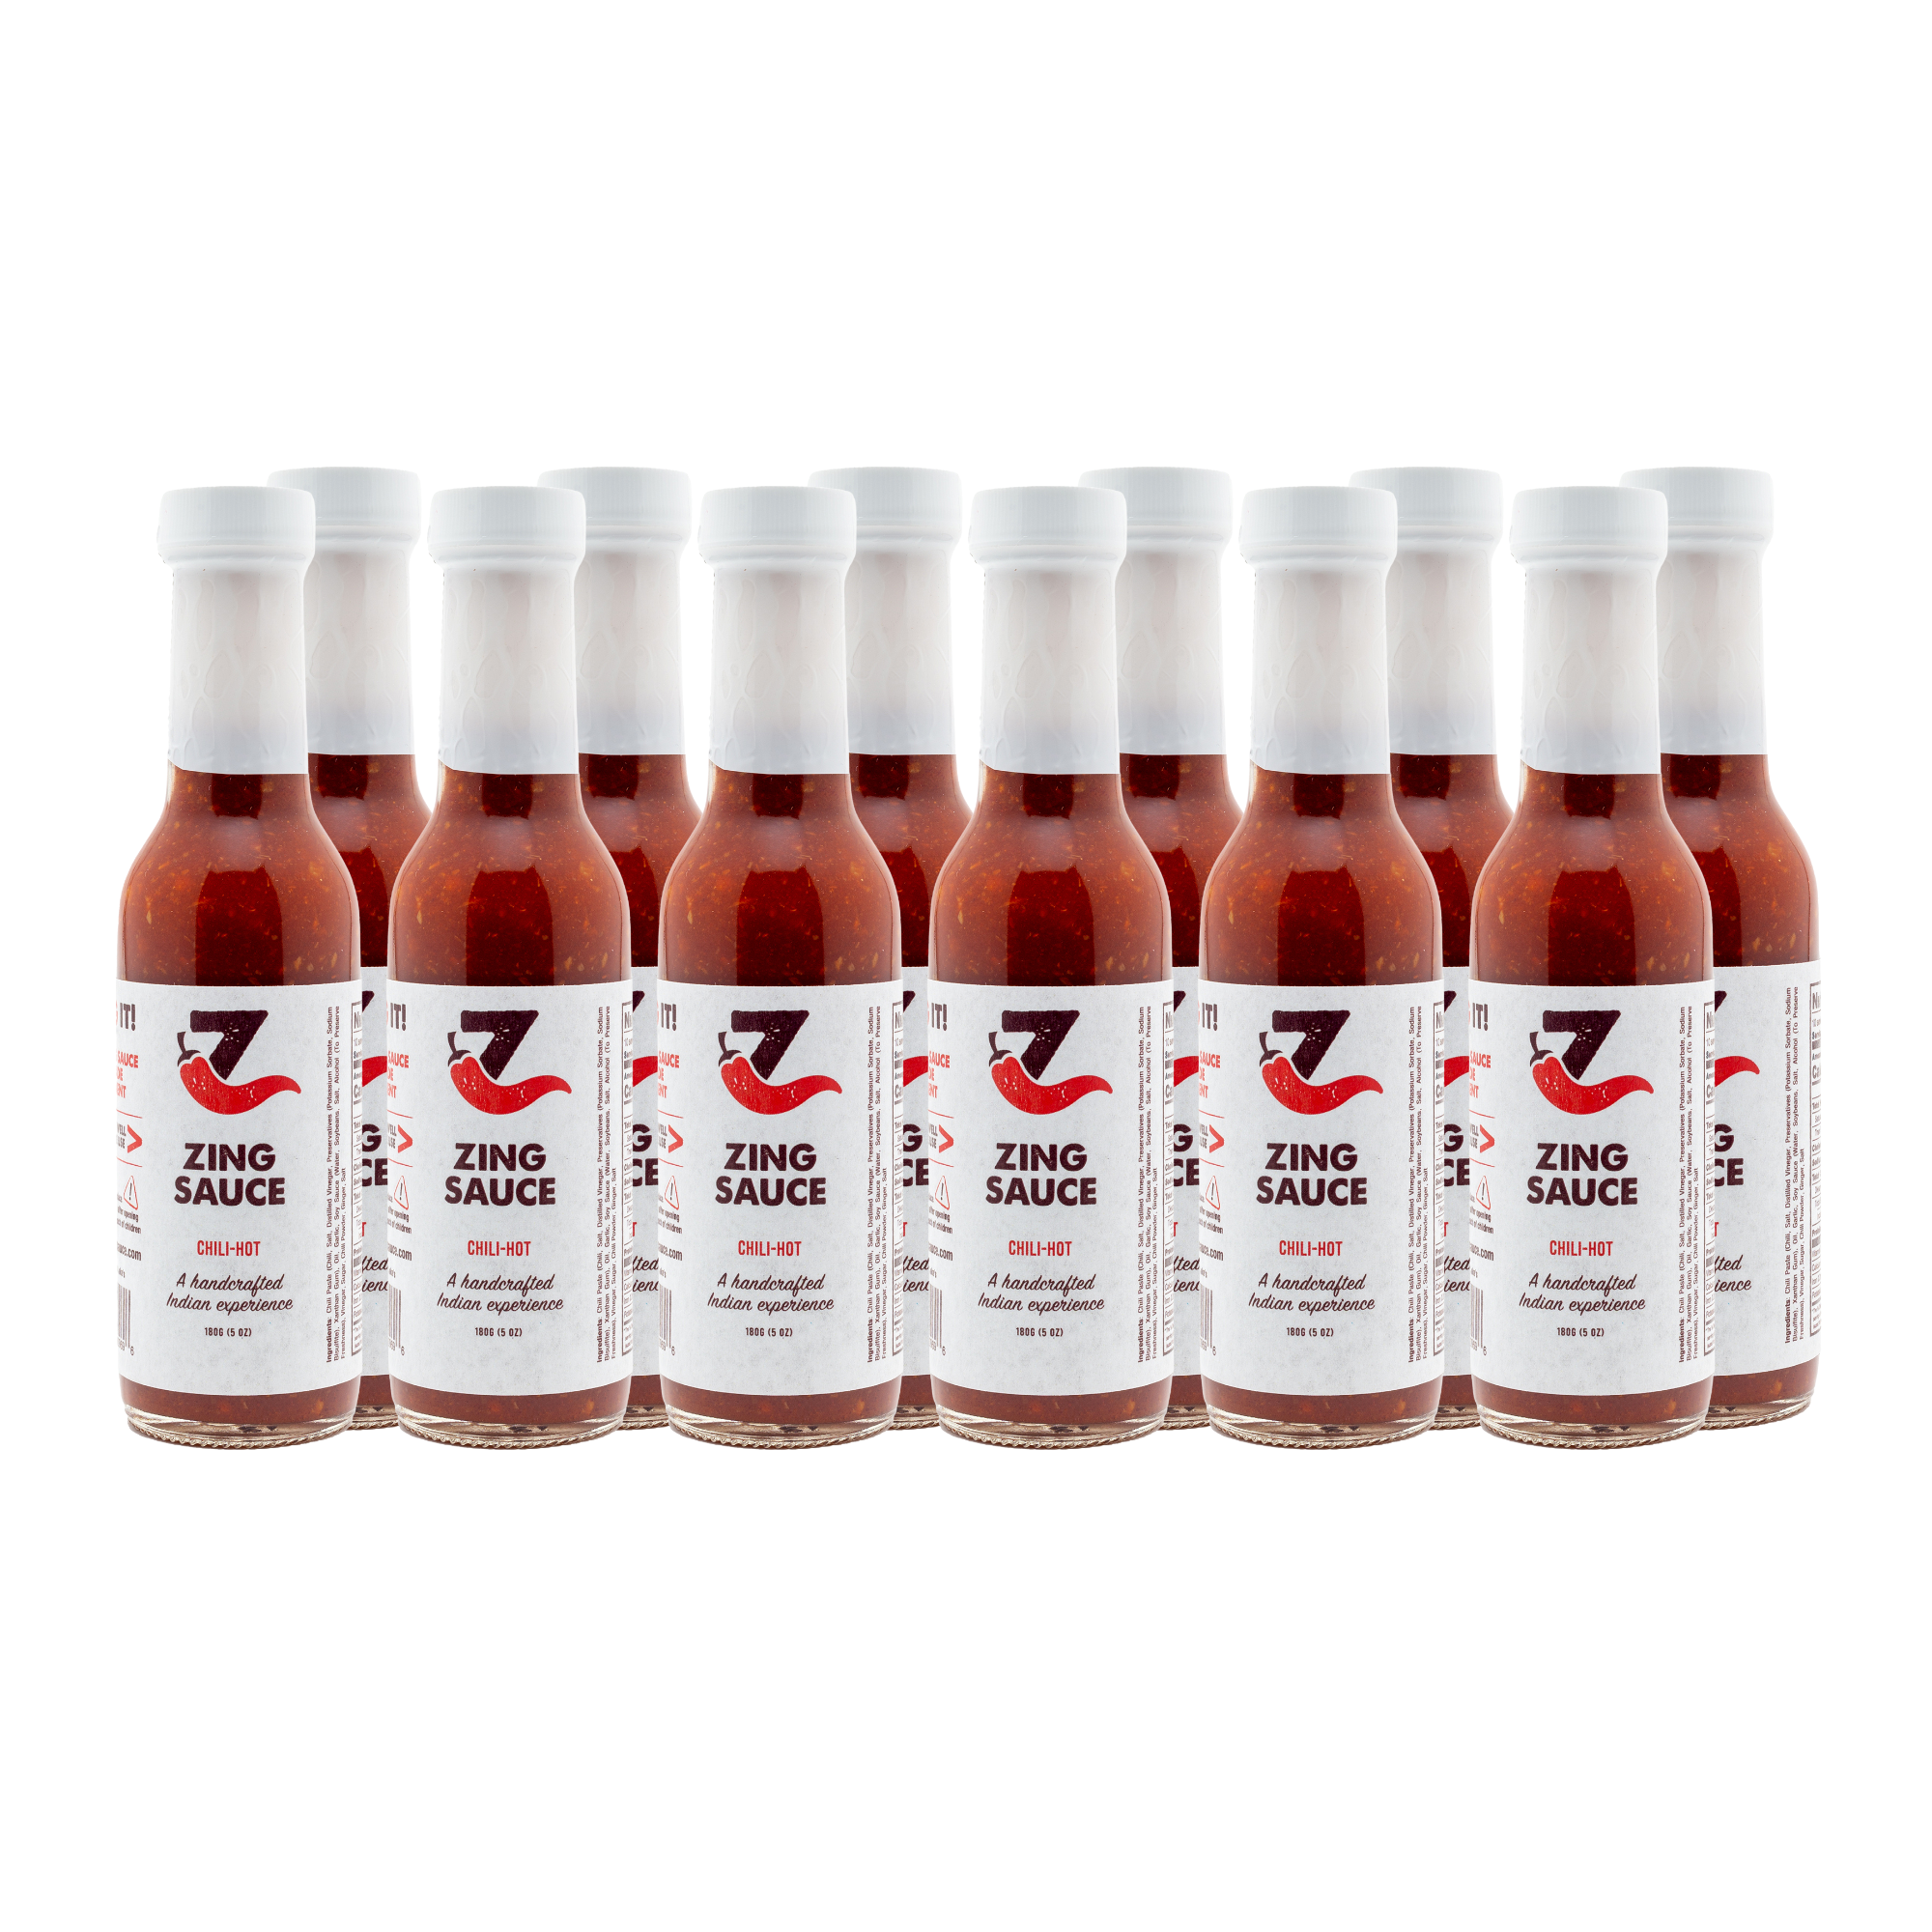 The Zing Sauce Great Tasting Hot Indian Chili Garlic Sauce - 12 Count  [Price Includes Shipping]